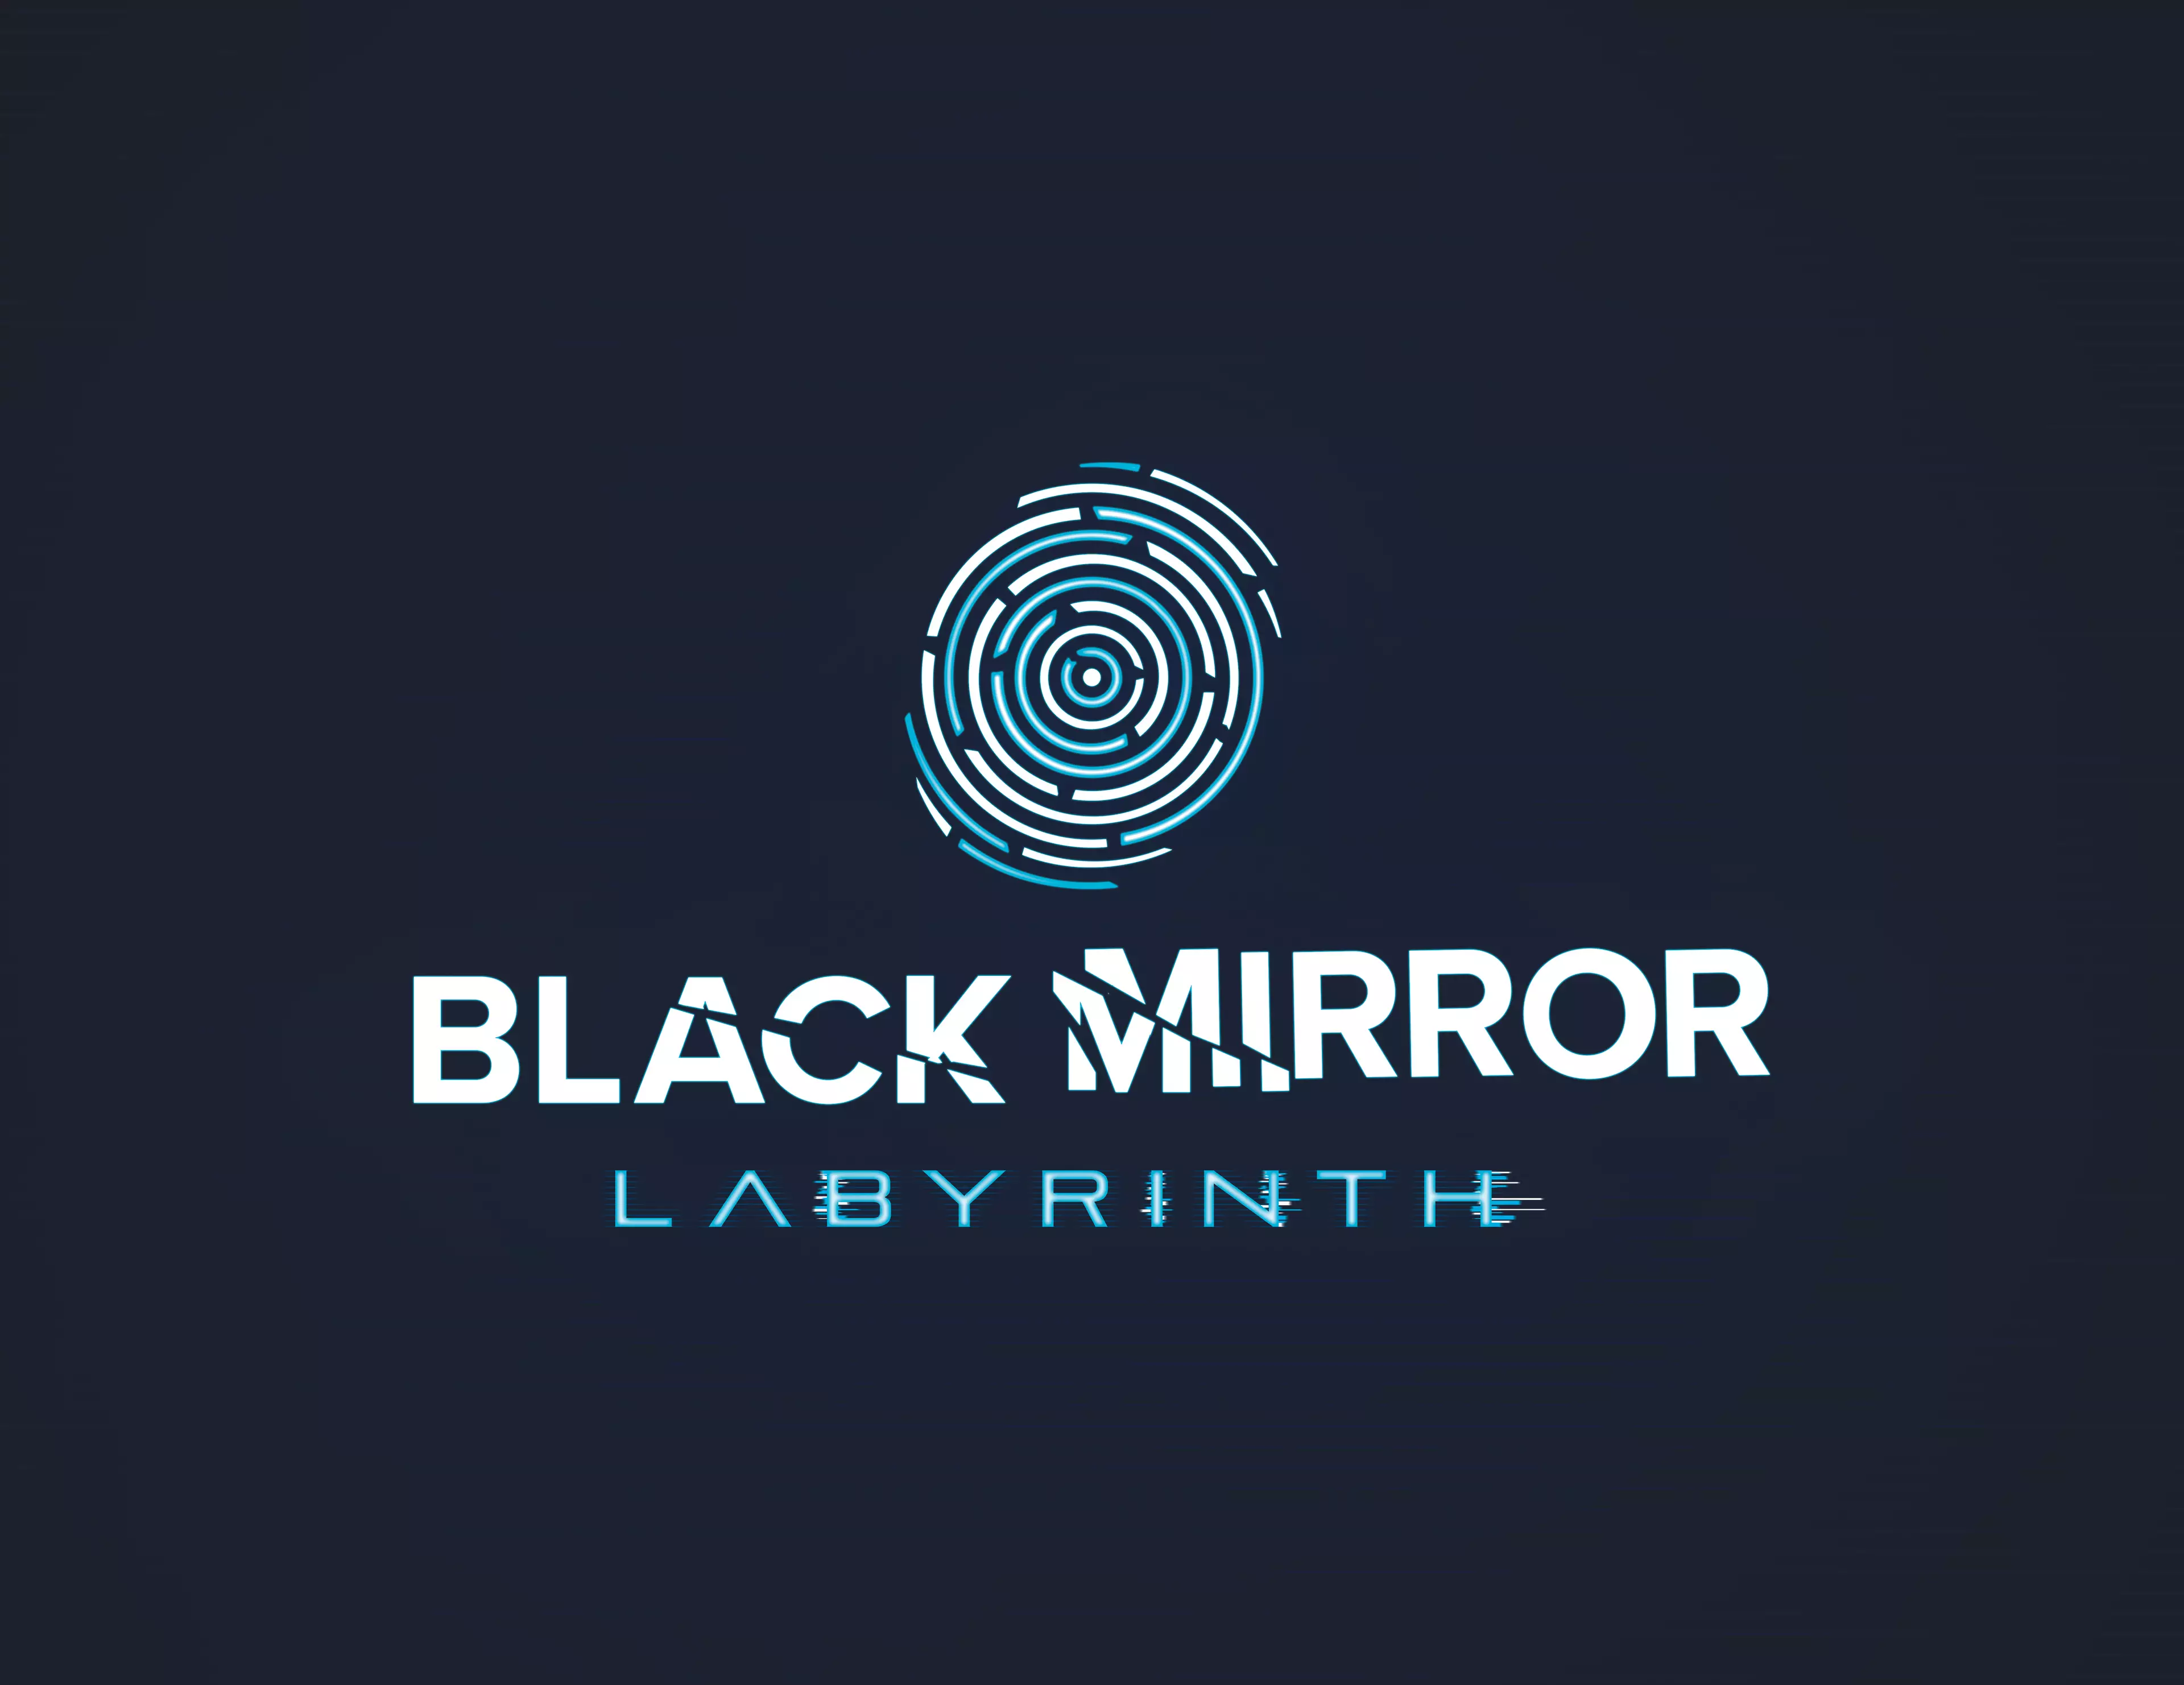 The 'Black Mirror' experience launches late next month (